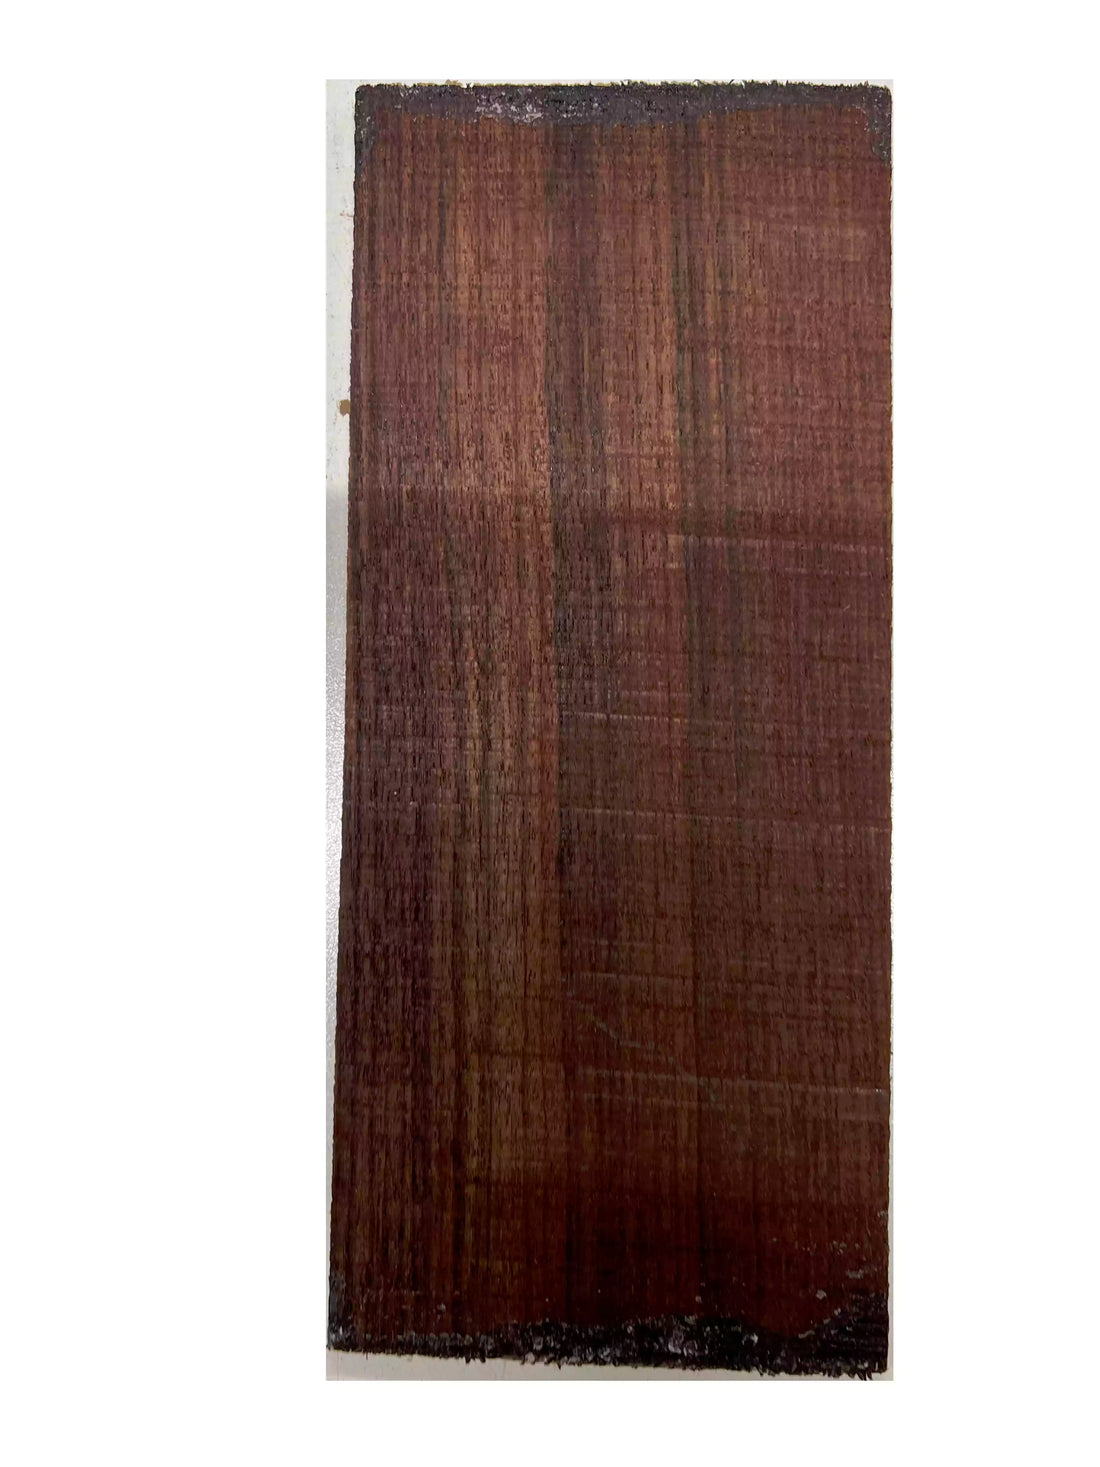 Pack of 5, East Indian Rosewood Electric/Bass Guitar Headplates 9&quot; x 4&quot; x 1/8&quot; 